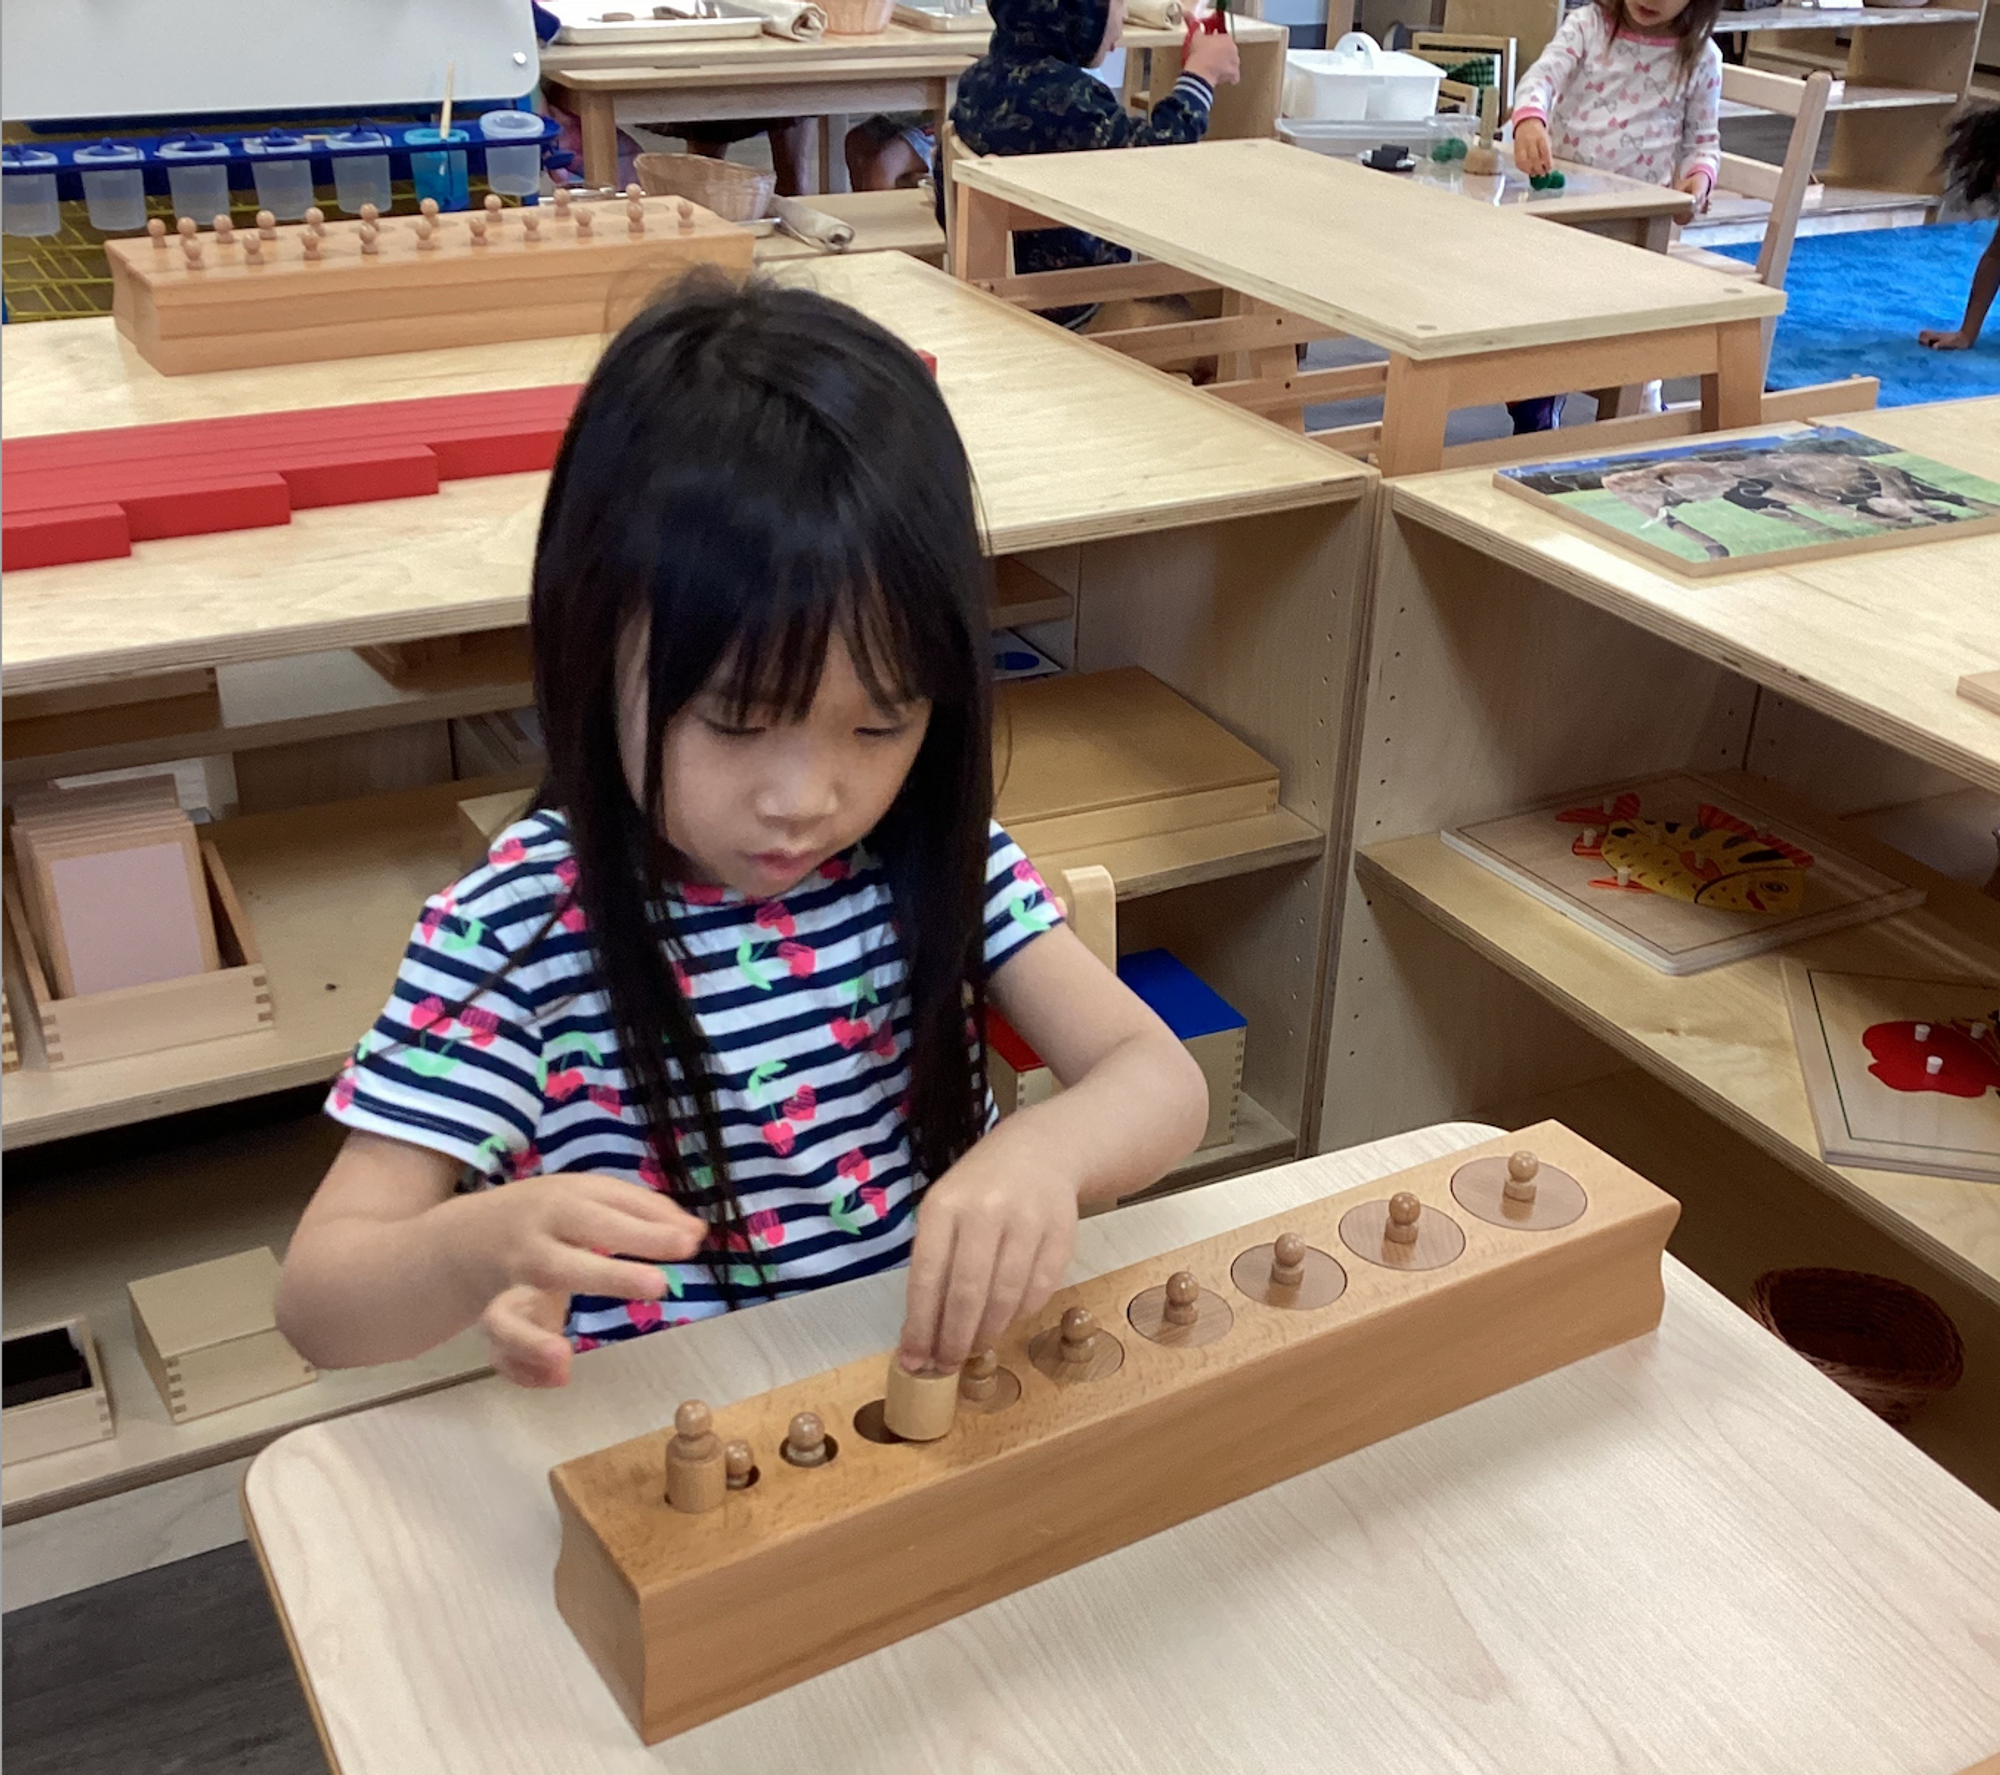 Children in a well-organized mixed-age Montessori classroom ponder over an activity using blocks of different sizes, classic Montessori classroom materials 